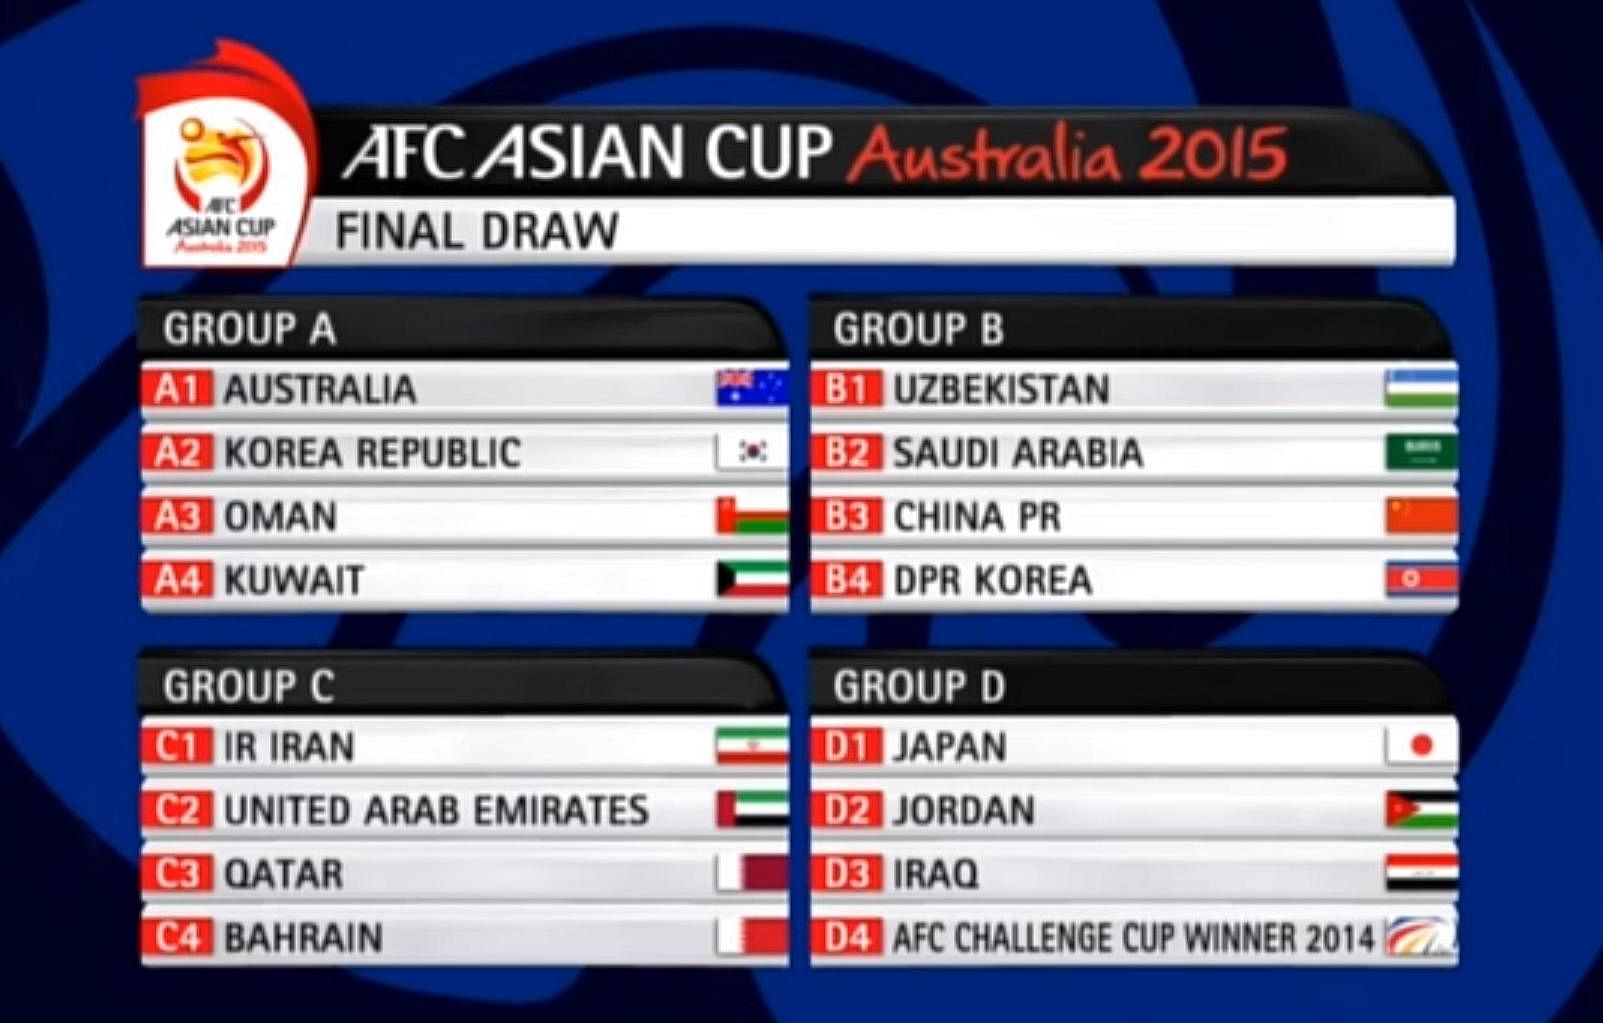 Japan And China The Teams To Watch Out For In The 2015 Afc Asian Cup